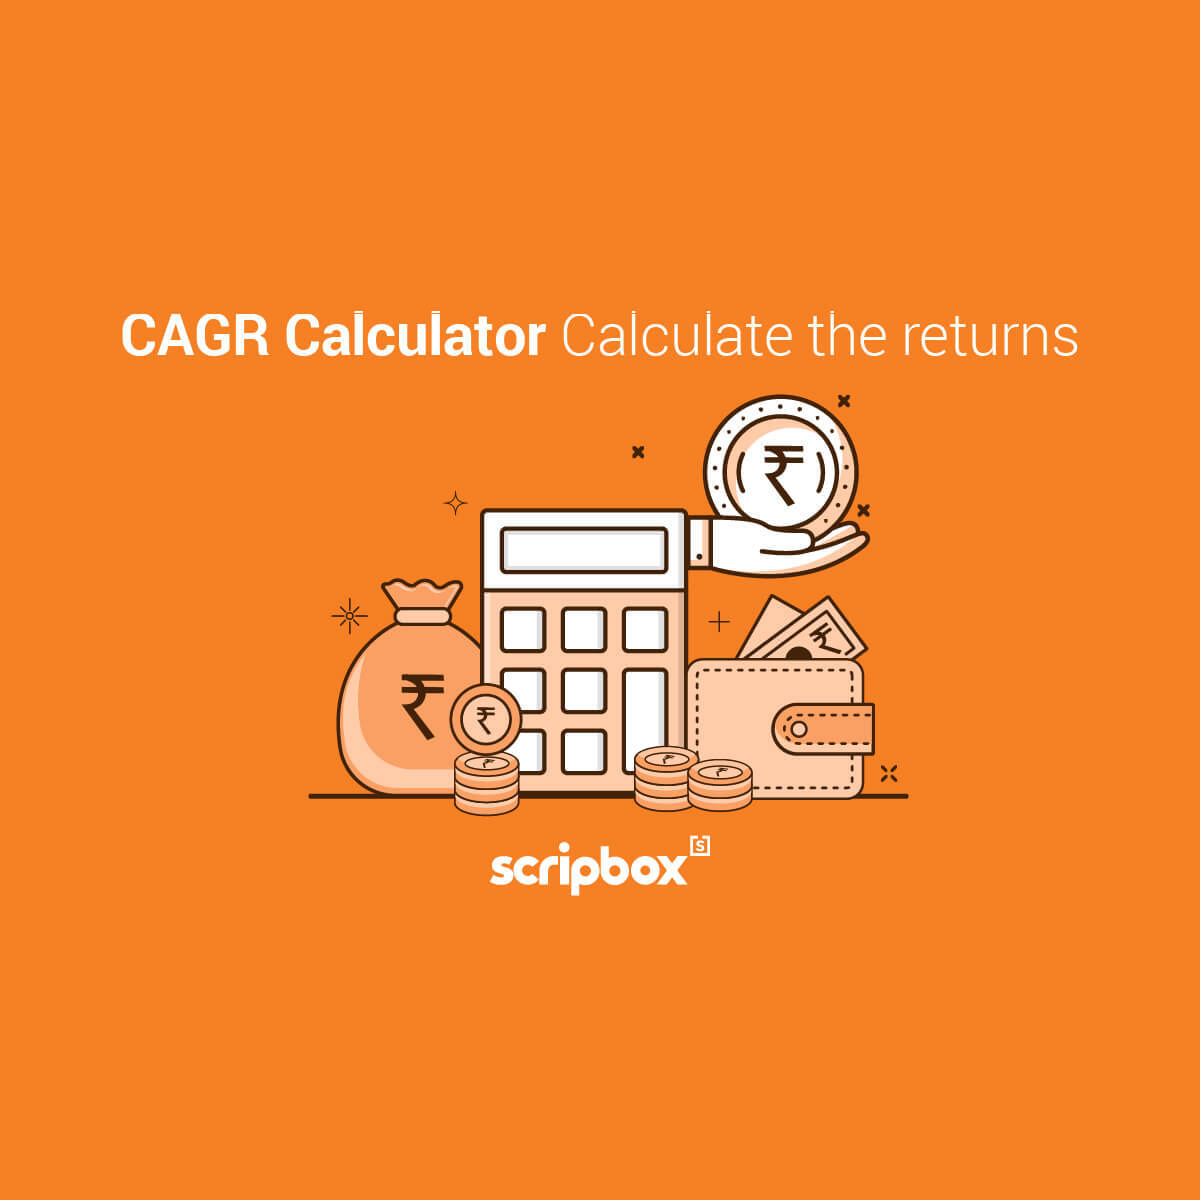 CAGR Calculator Calculate Compound Annual Growth Rate (CAGR) Scripbox